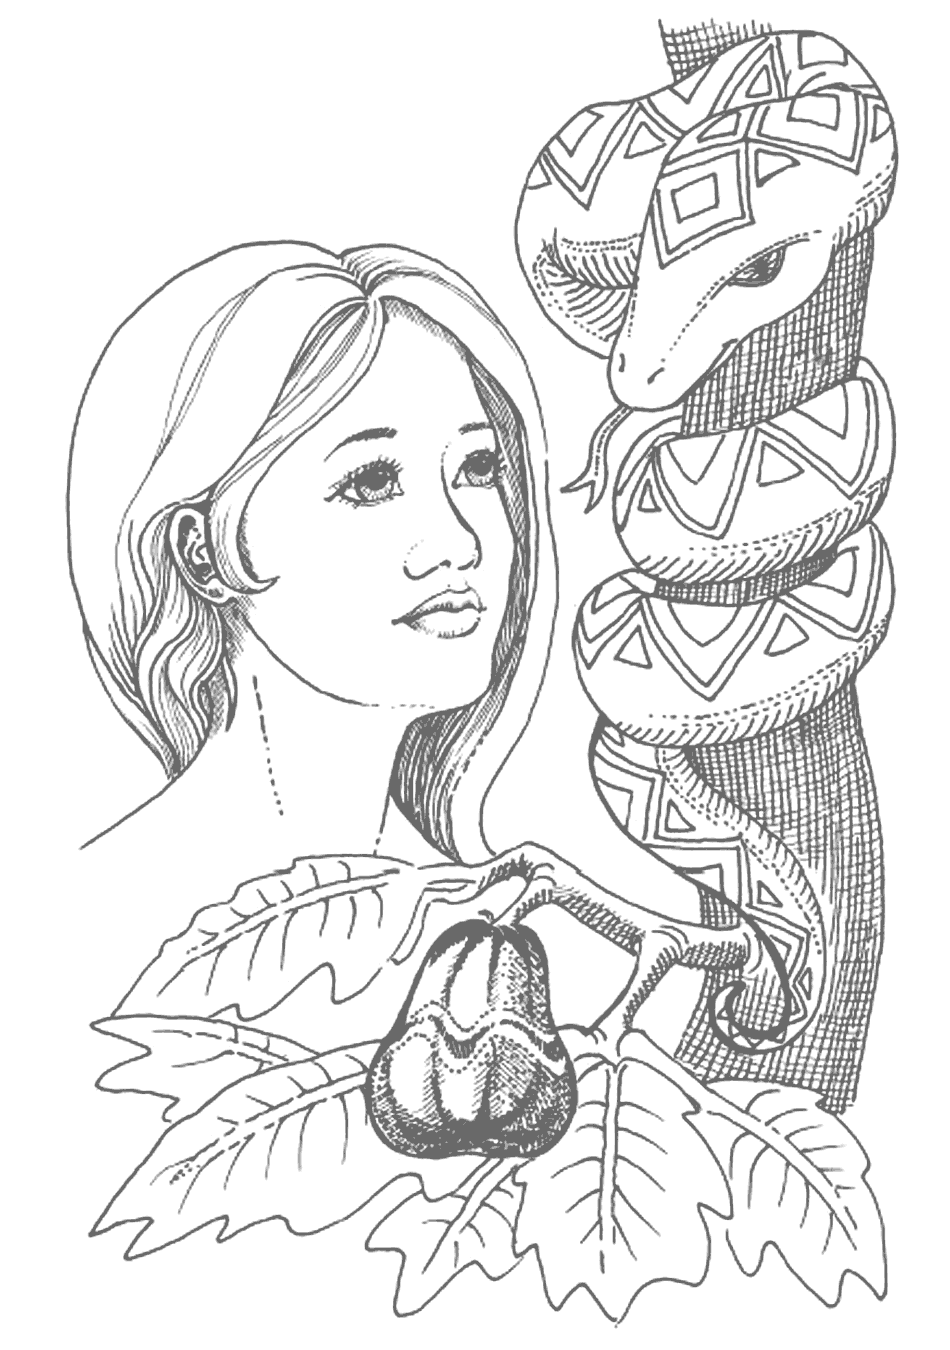 Eve and the Serpent Bible Story Art for Coloring